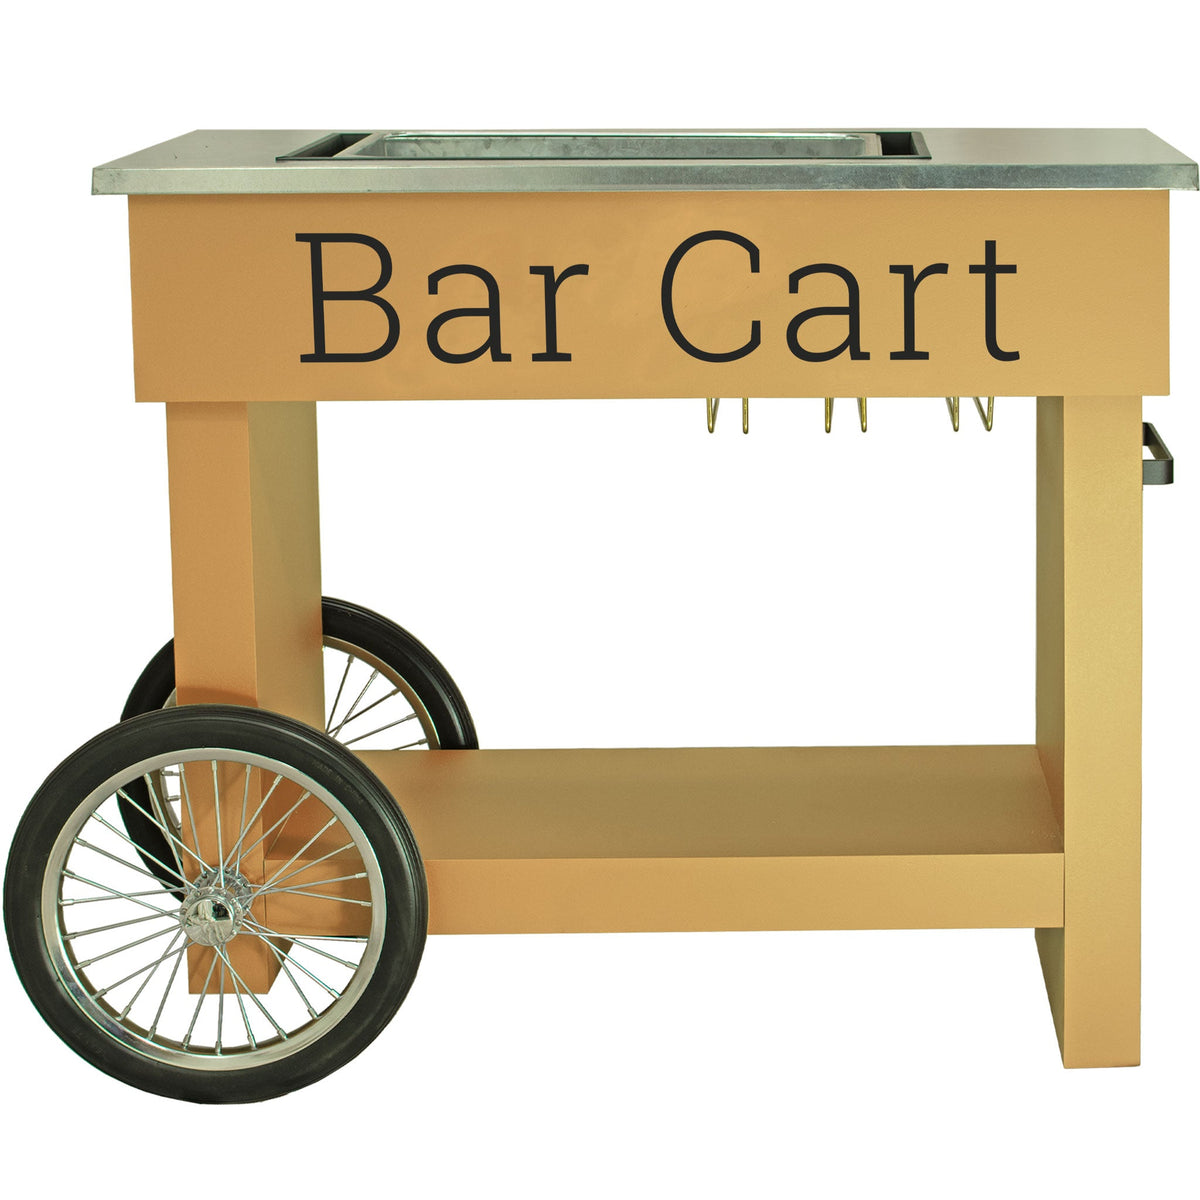 Lee Display's Champagne and Wine Bar Cart with Wheels in Champagne Color and a Bar Cart Decal